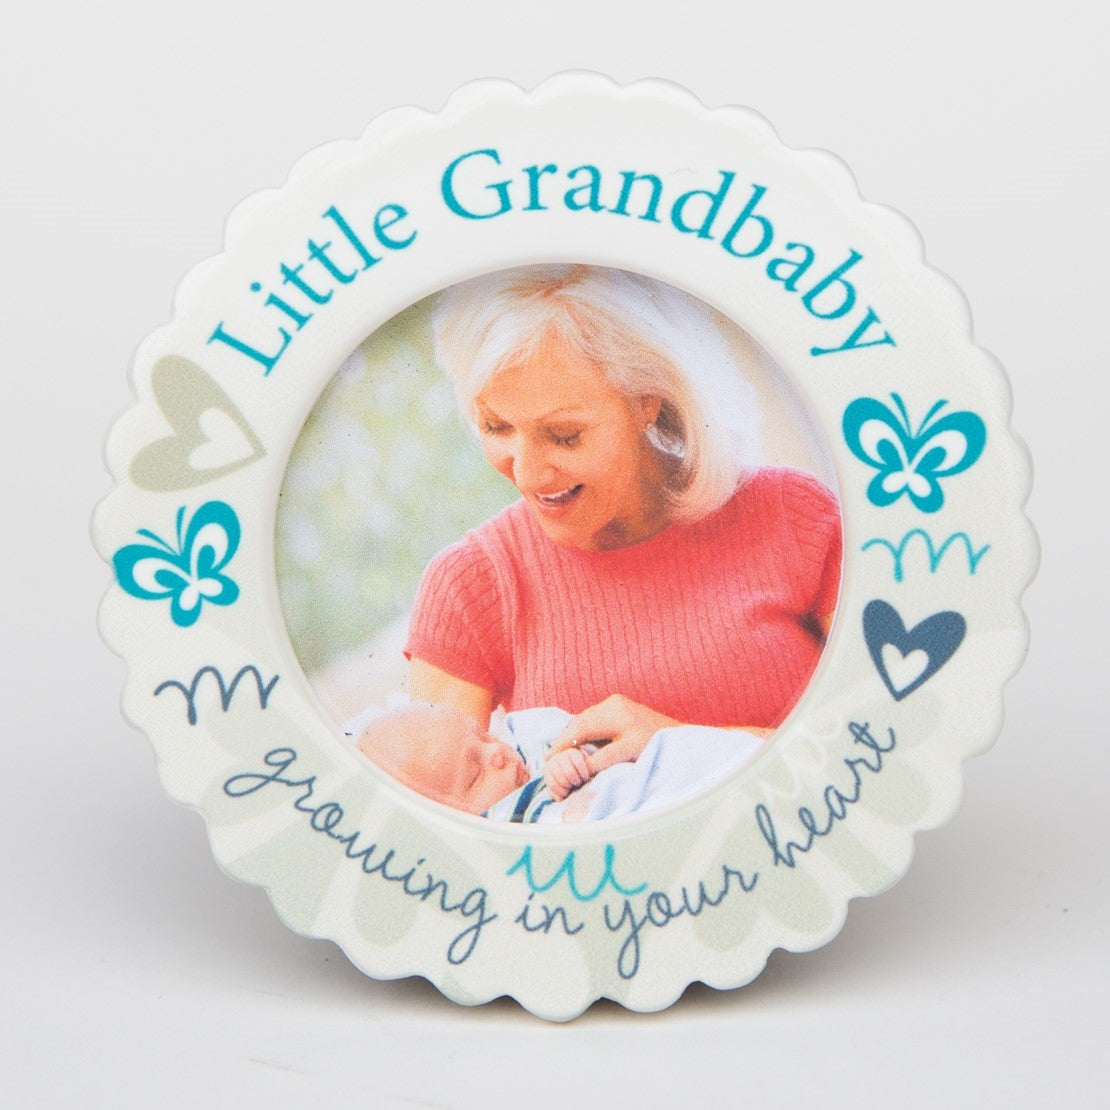 Ultrasound Ornament or Table Frame for Grandparents- Boxed